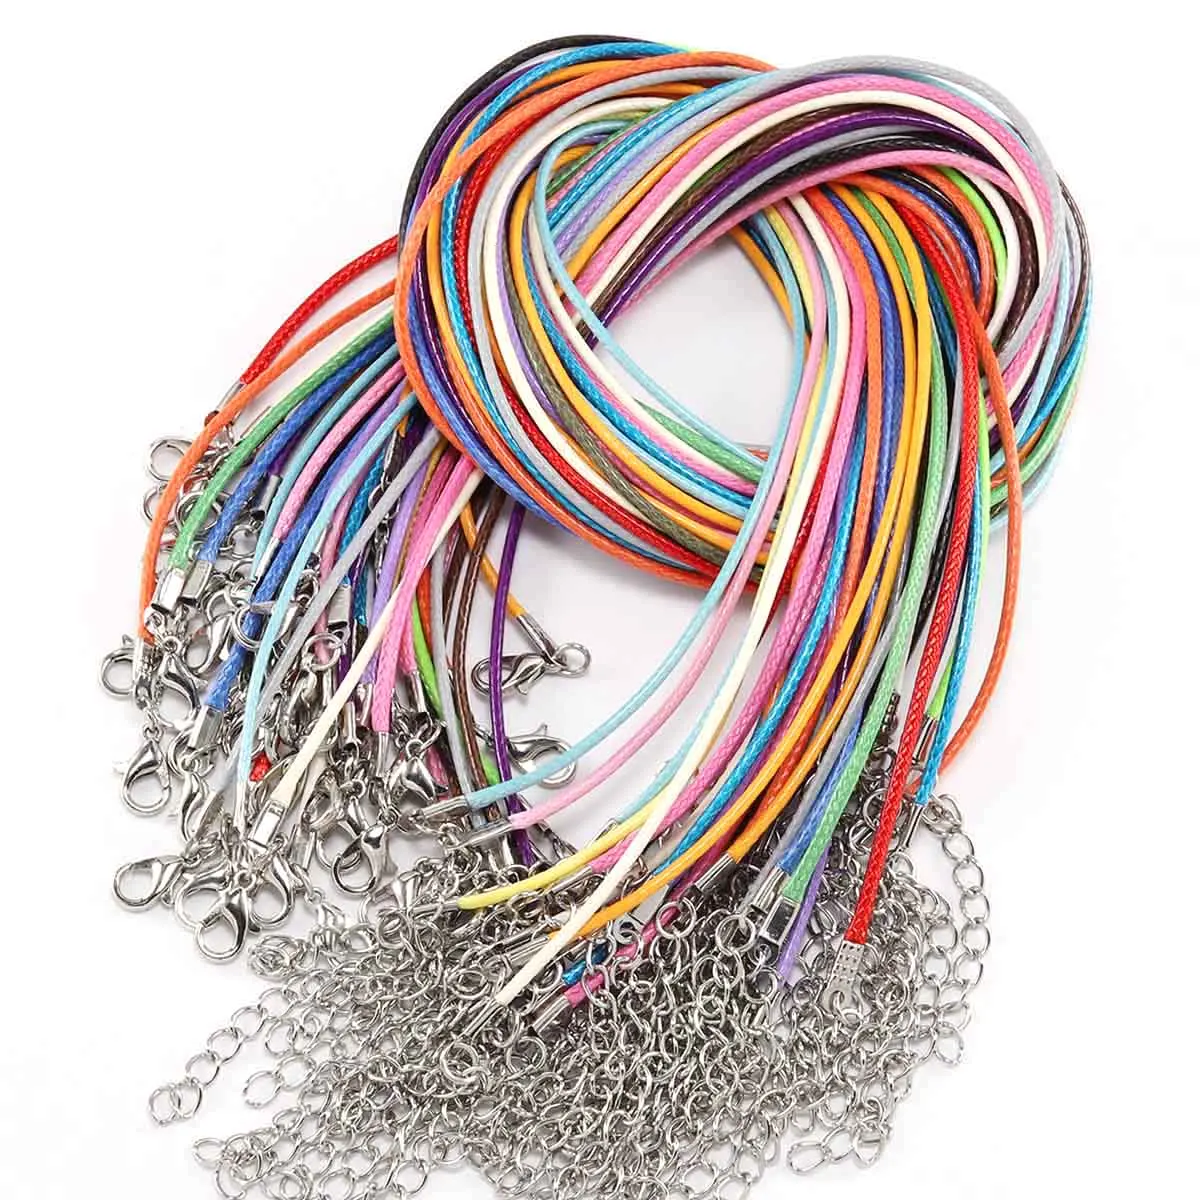 1.5/2mm 45cm Adjustable Colorful Leather Cord Necklace With Clasp Braided Rope For Jewelry Making DIY Necklace Bracelet (1600510225184)